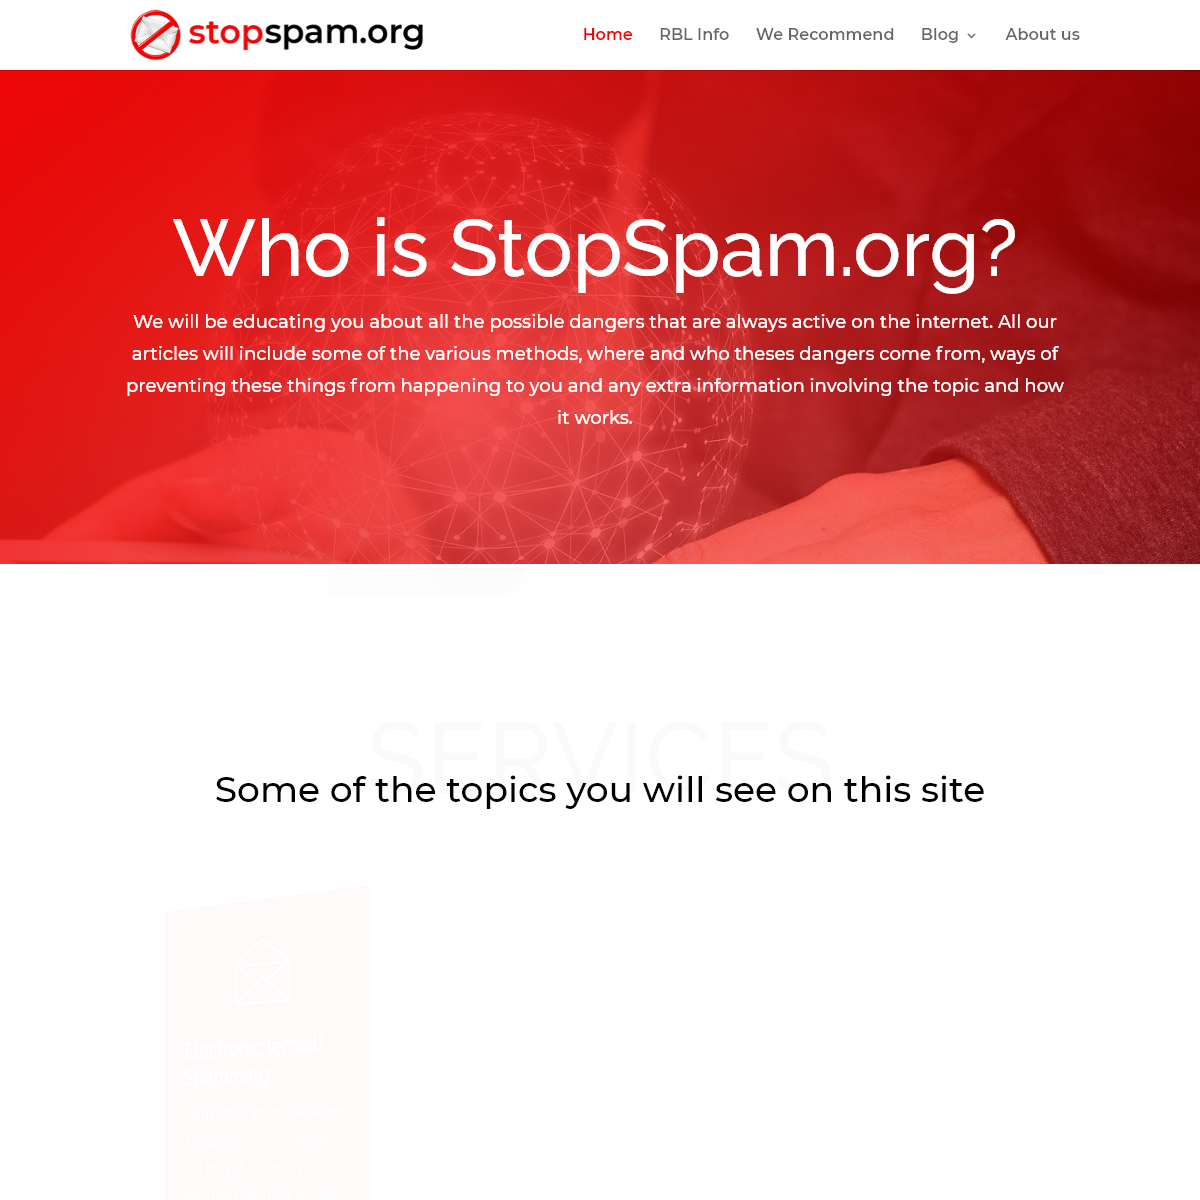 A complete backup of stopspam.org